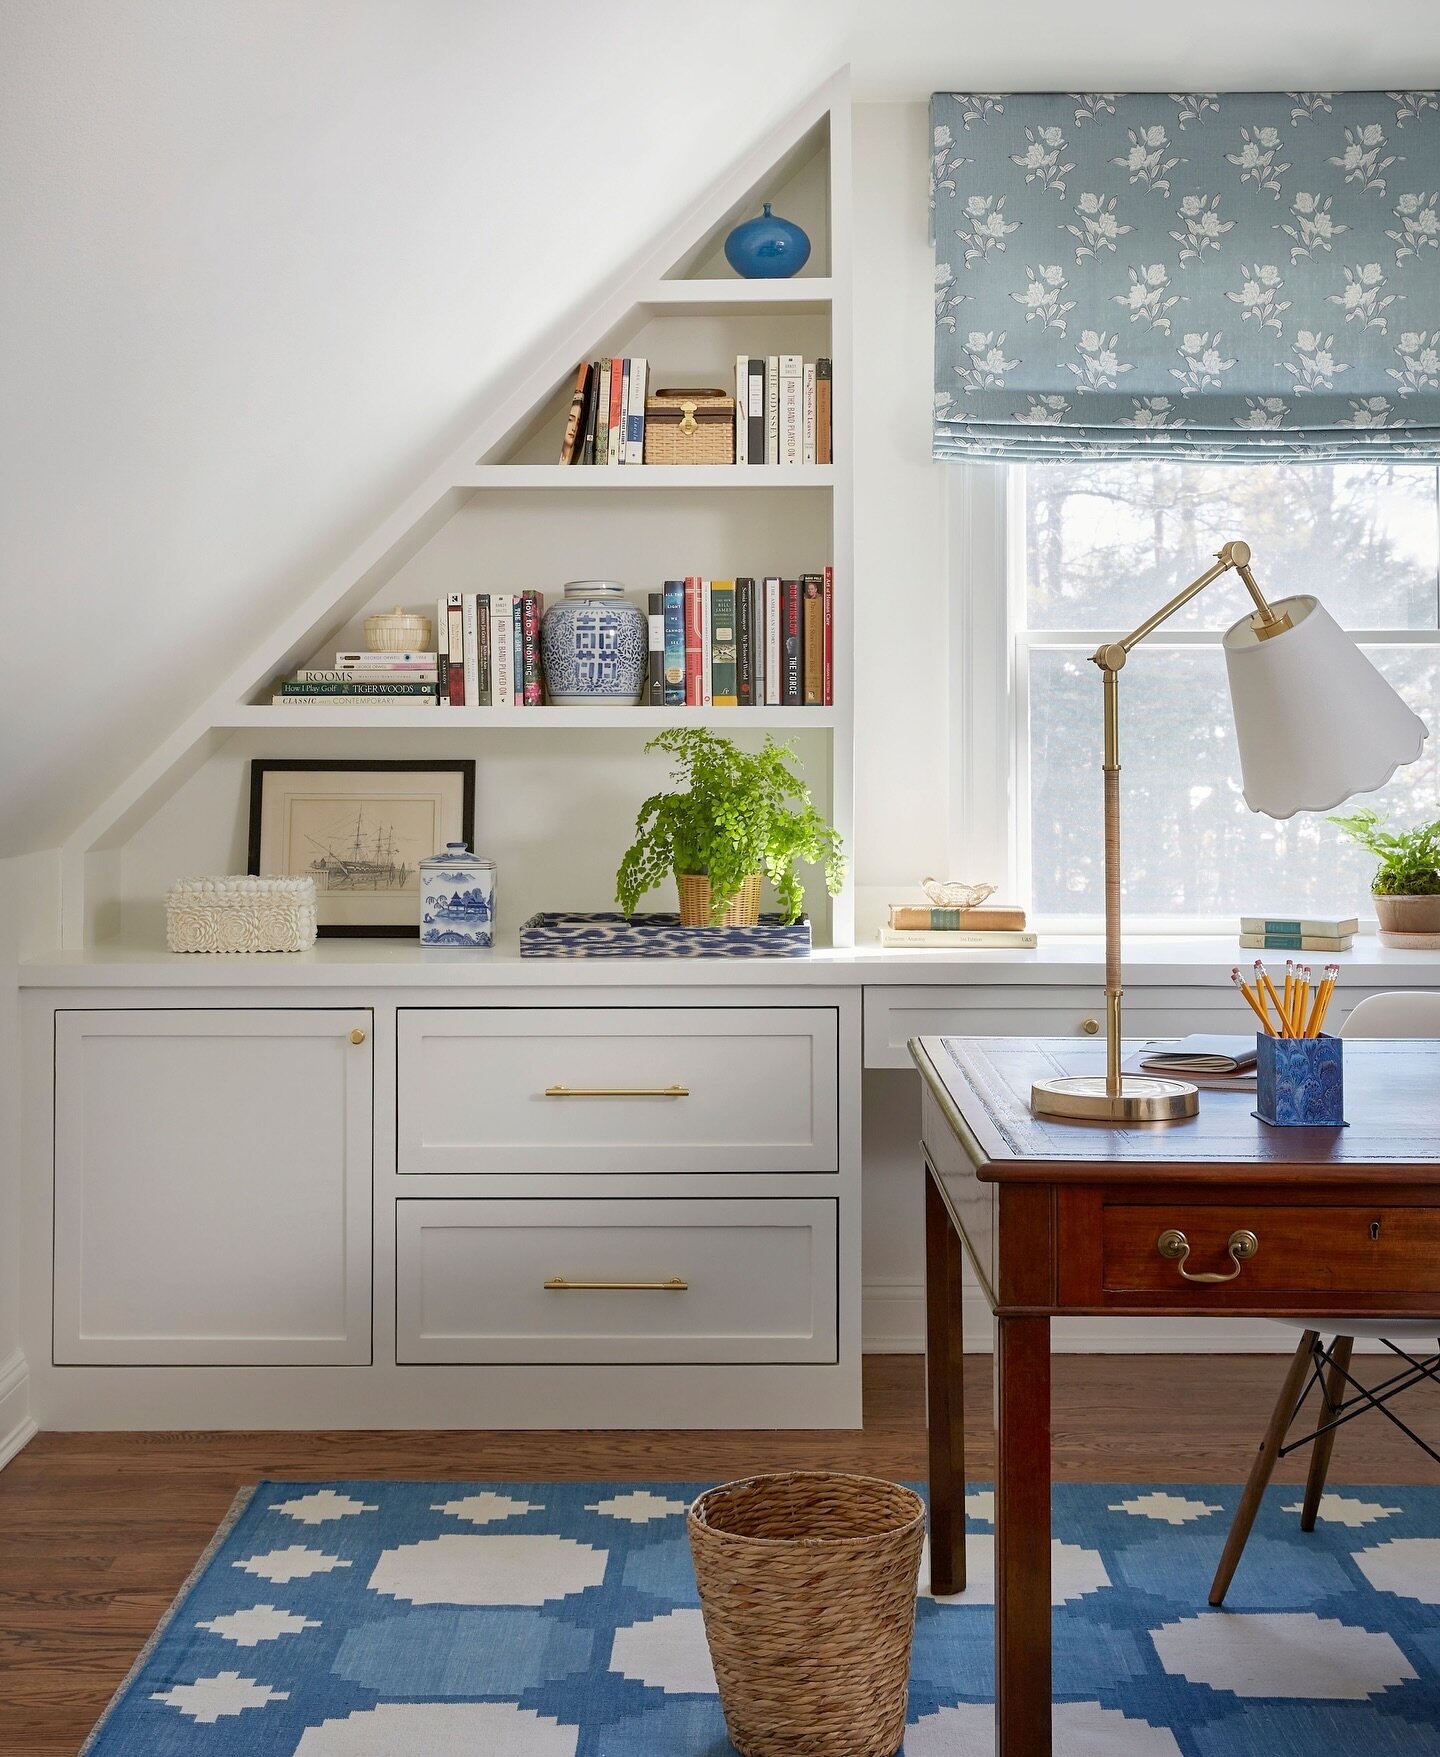 It&rsquo;s back to school for the kiddos! I realized that I never posted this image of the sweet office from our Quogue project. We designed built in shelving and storage to fit under the eaves and found an antique double desk for the clients to work